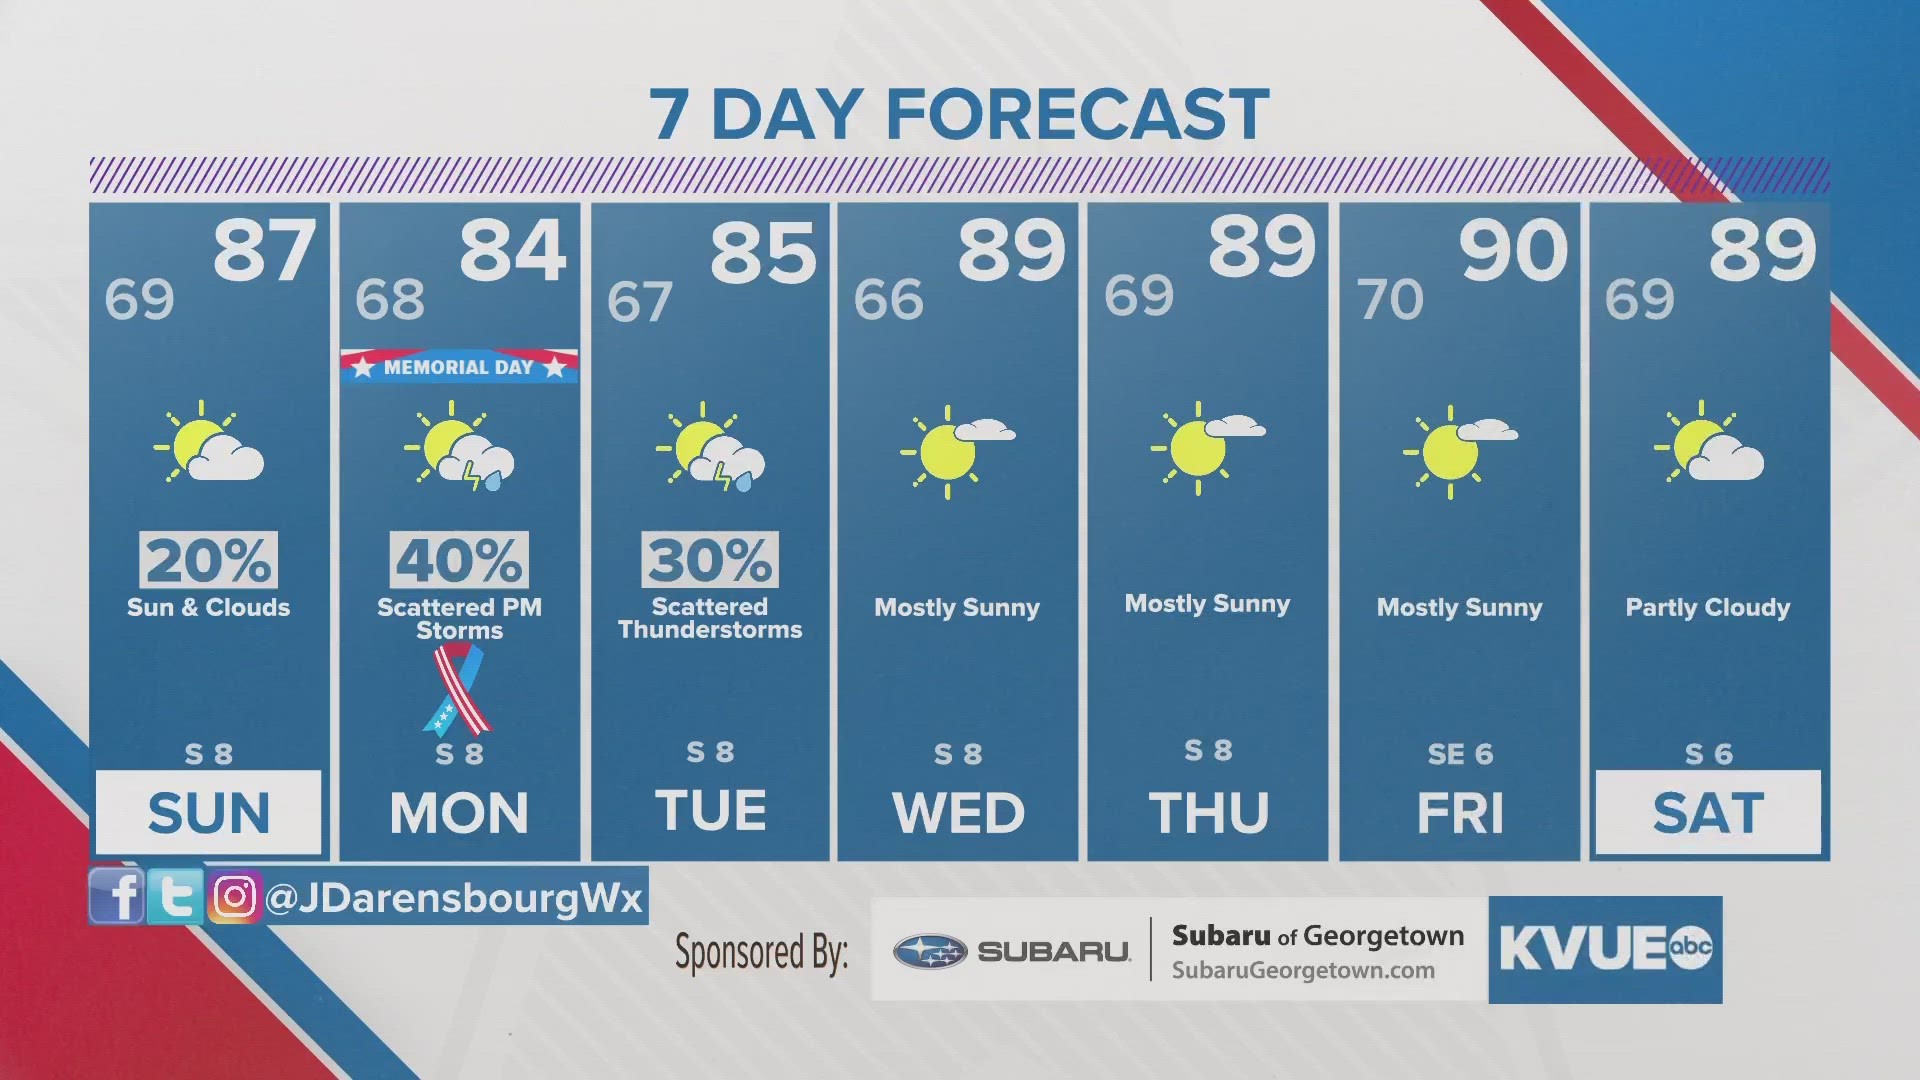 Trending drier, but storms still possible Sunday and Monday